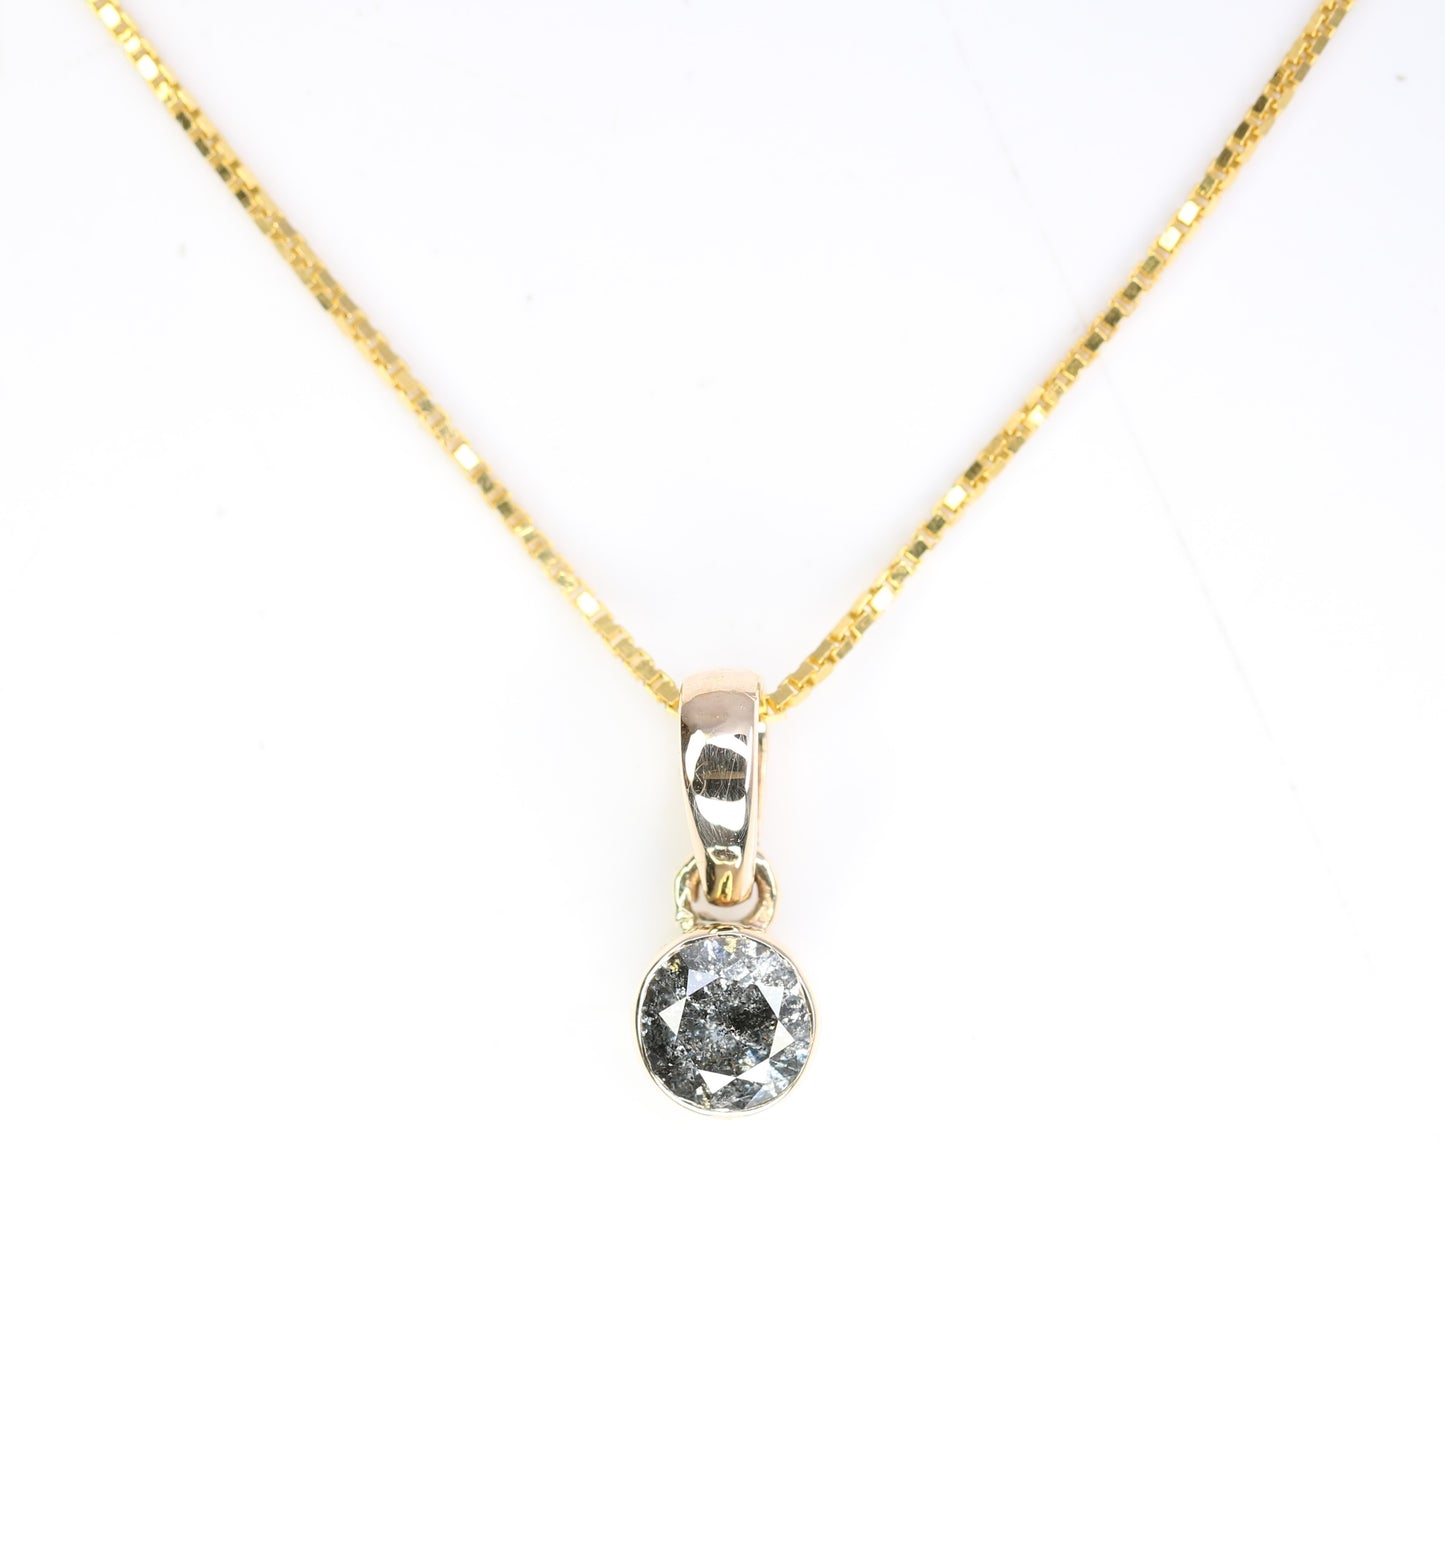 Loose Salt And Pepper Diamond Pendant Bezel Setting With 10K Gold Chain Necklace Gift For Her